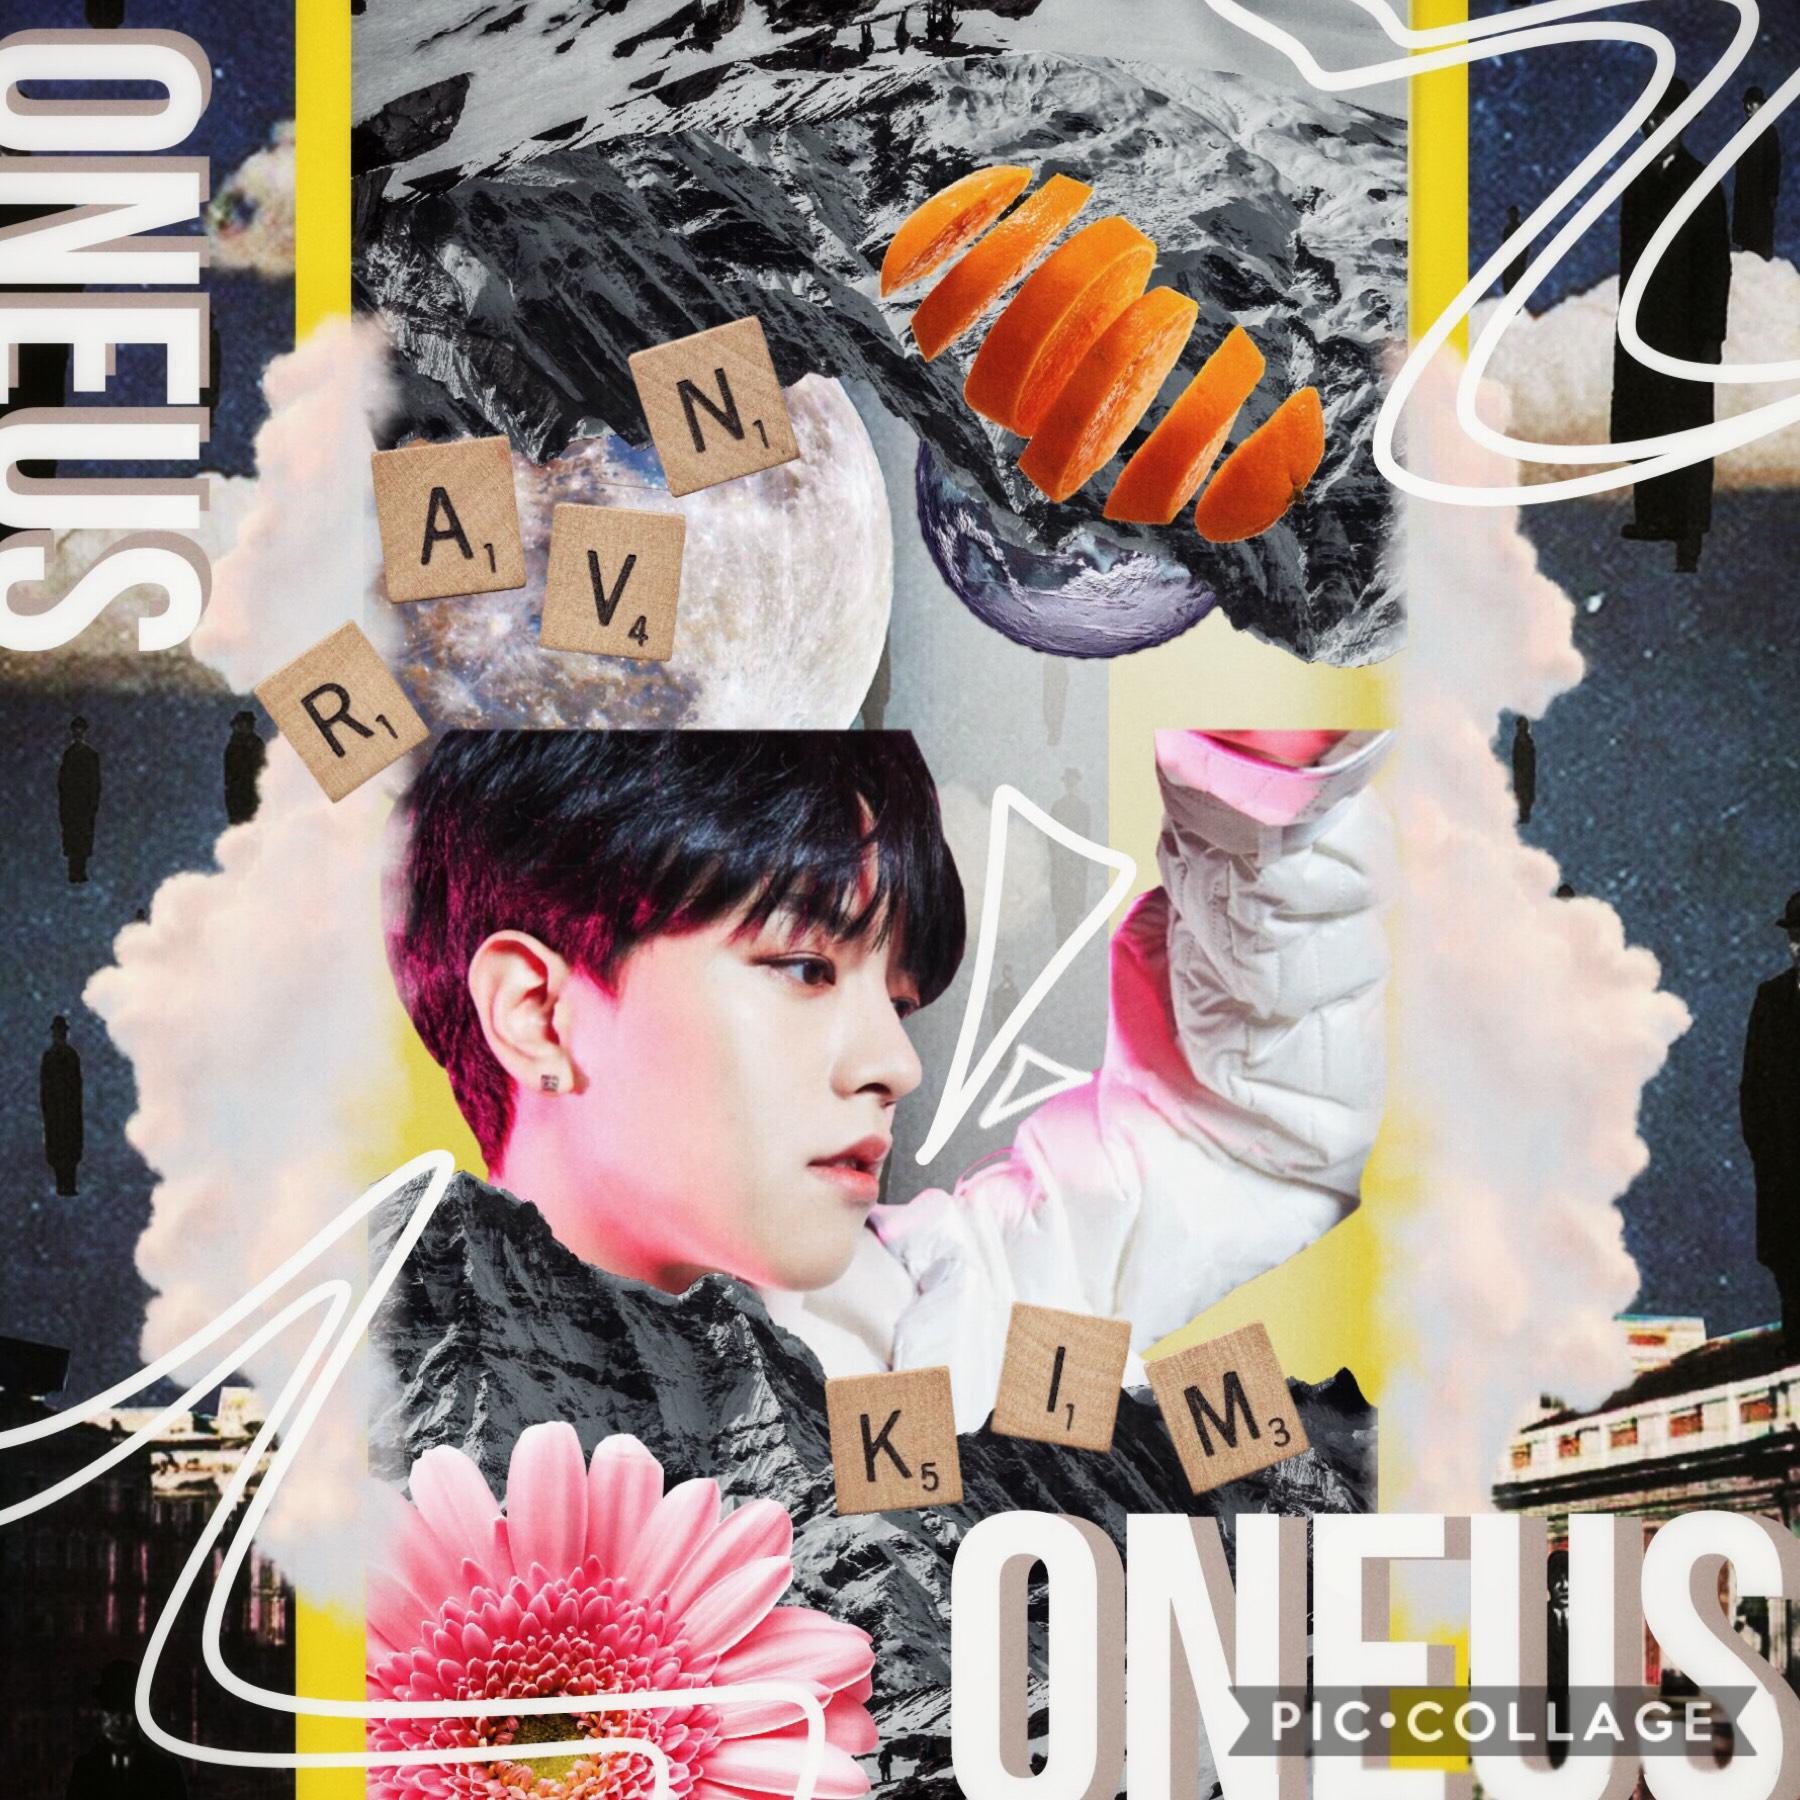 ⋅•⋅⊰∙∘☽༓☾∘∙⊱⋅•⋅
here’s a messy edit made by a messy person...
💁‍♀️💁‍♀️💁‍♀️moi💁‍♀️💁‍♀️💁‍♀️

scrabble piece credit to MinGeniusYoongi 

qotd: what are groups or artists that you want to stan?
aotd: P!ATD, ONEUS, VAV, Ateez, and Got7
•••...               ...